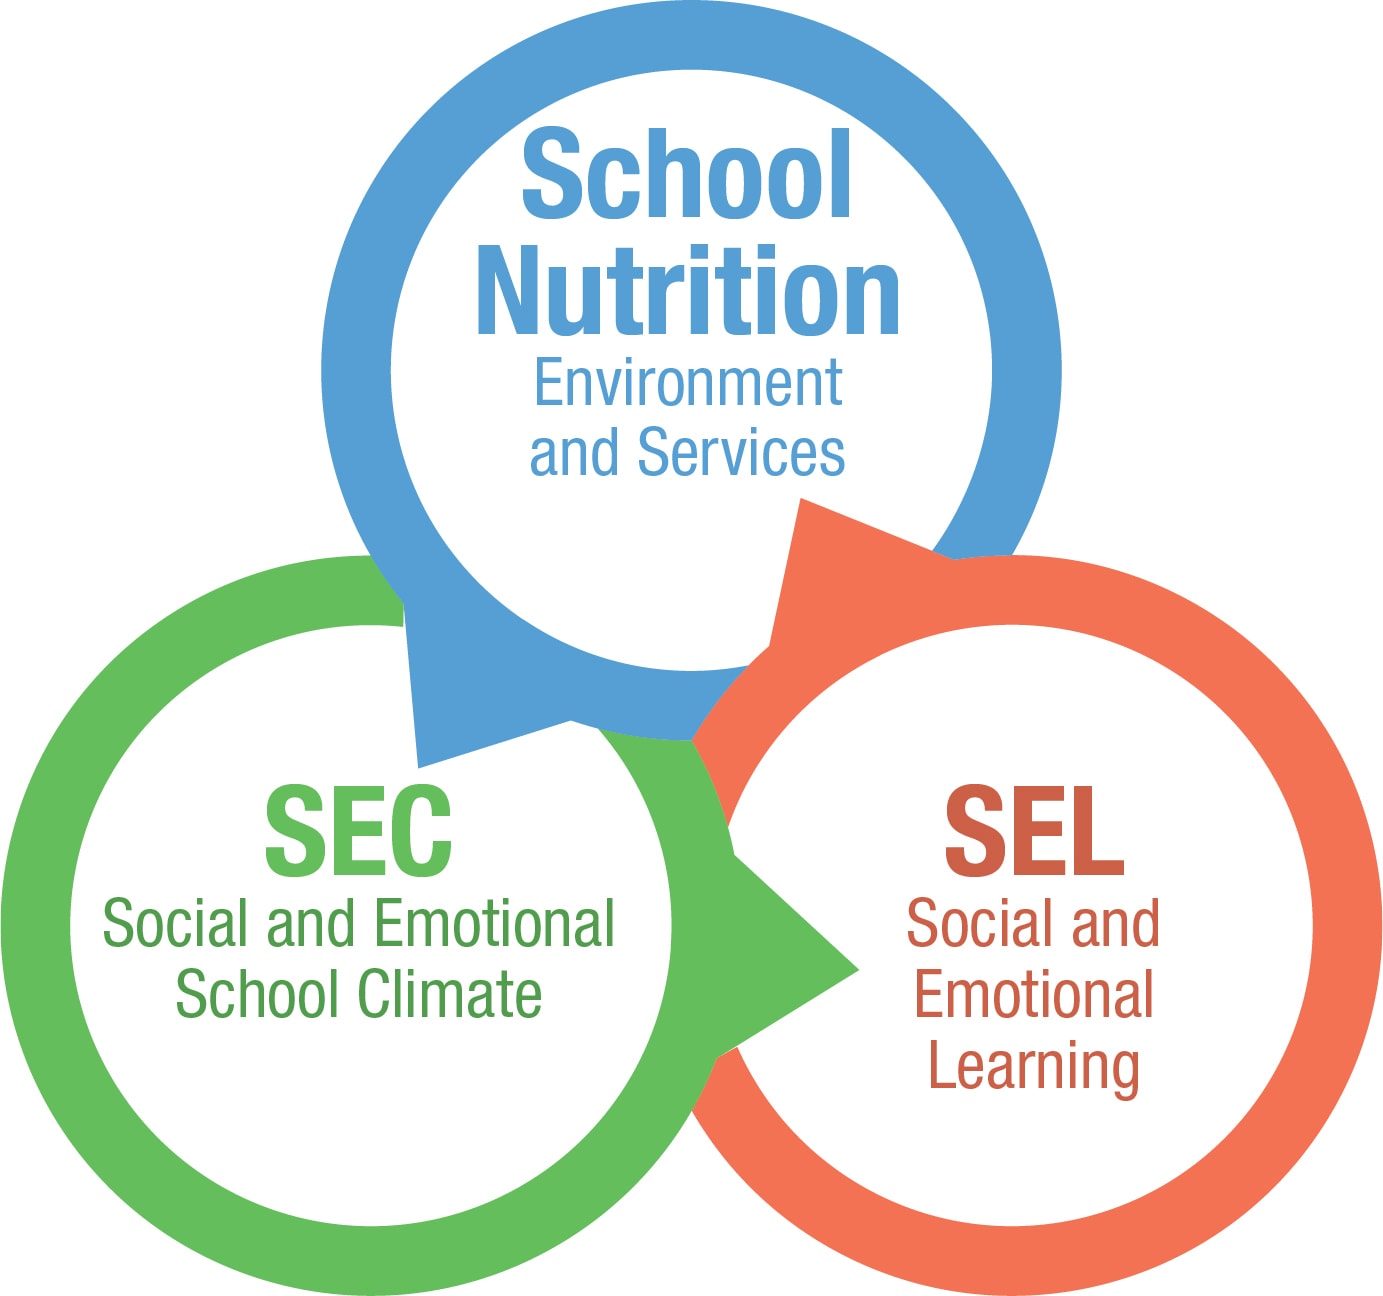 School Nutrition and the Social and Emotional Climate and Learning